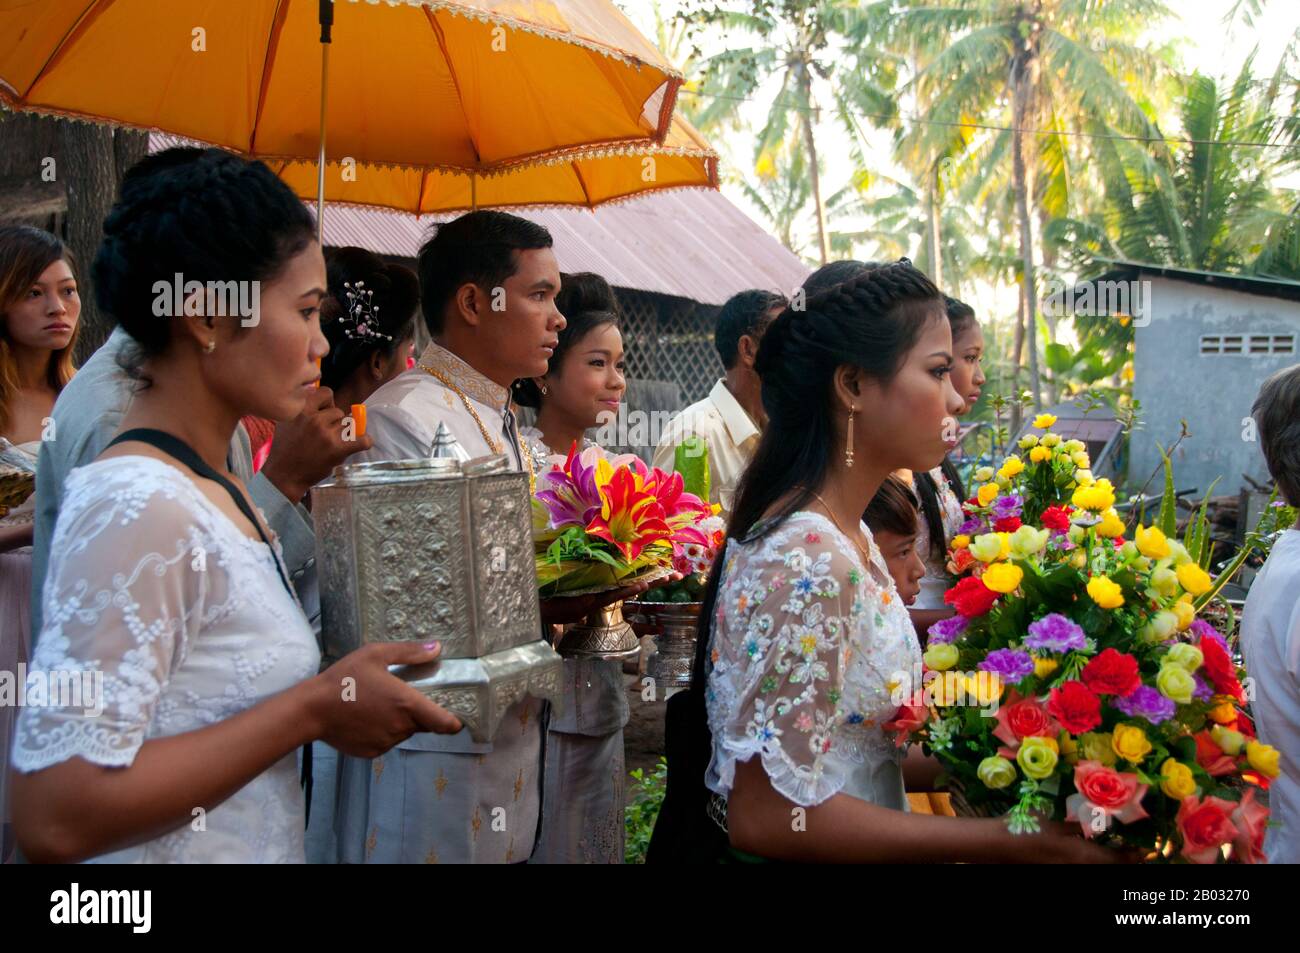 The traditional Khmer wedding is a long and colorful affair. Formerly it lasted three days, but since the 1980s it has more commonly lasted a day and a half.  The ceremony begins in the morning at the home of the bride and is directed by the achar (a specialist in ritual who acts as a master of ceremonies). Buddhist priests offer a short sermon and recite prayers of blessing. Parts of the ceremony involve ritual hair cutting and tying cotton threads soaked in holy water around the couple's wrists. Stock Photo